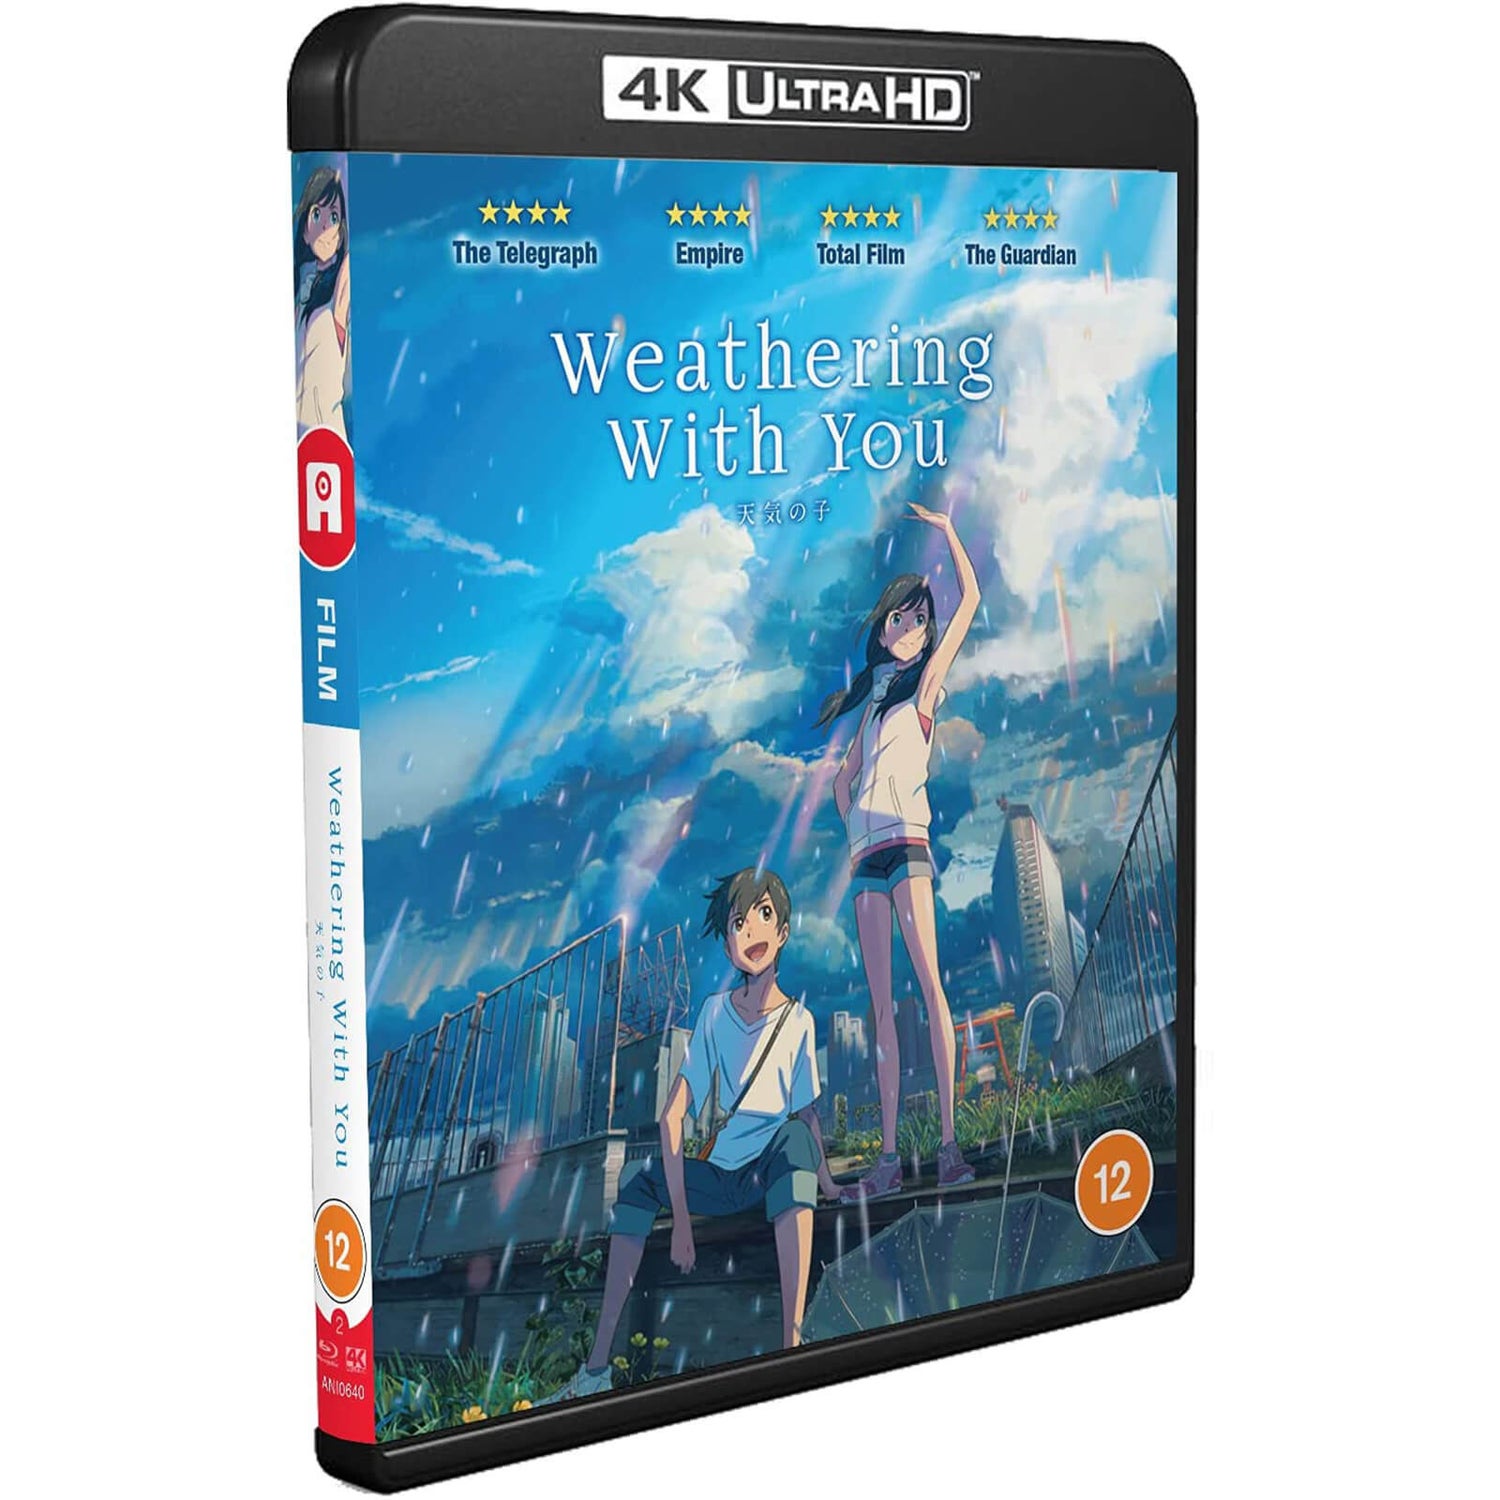 Weathering With You - Standard 4K Edition